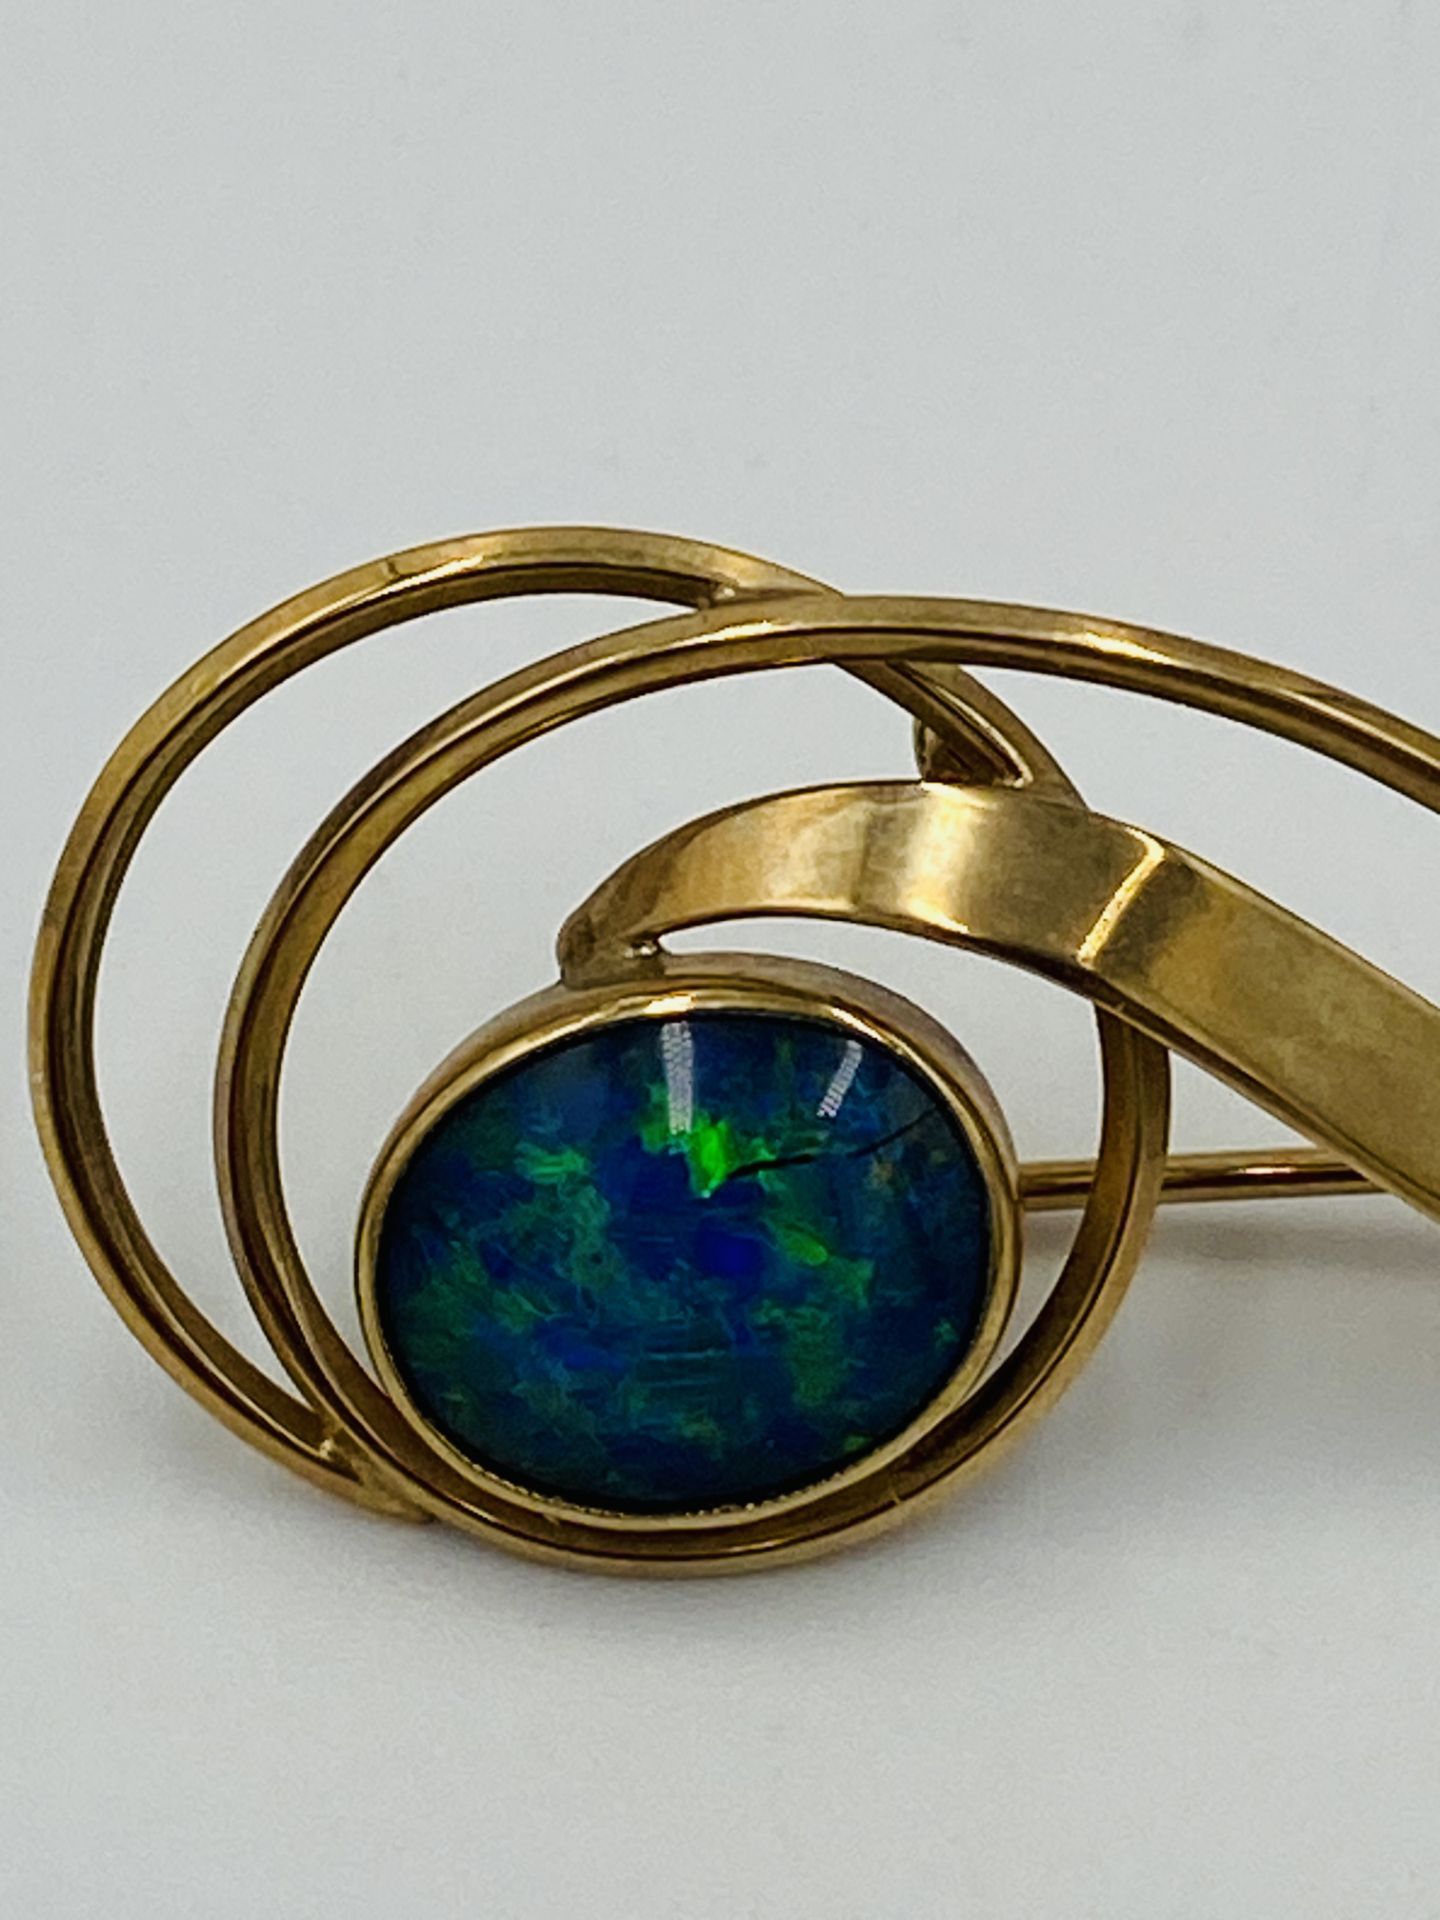 9ct gold brooch set with an opal - Image 5 of 5